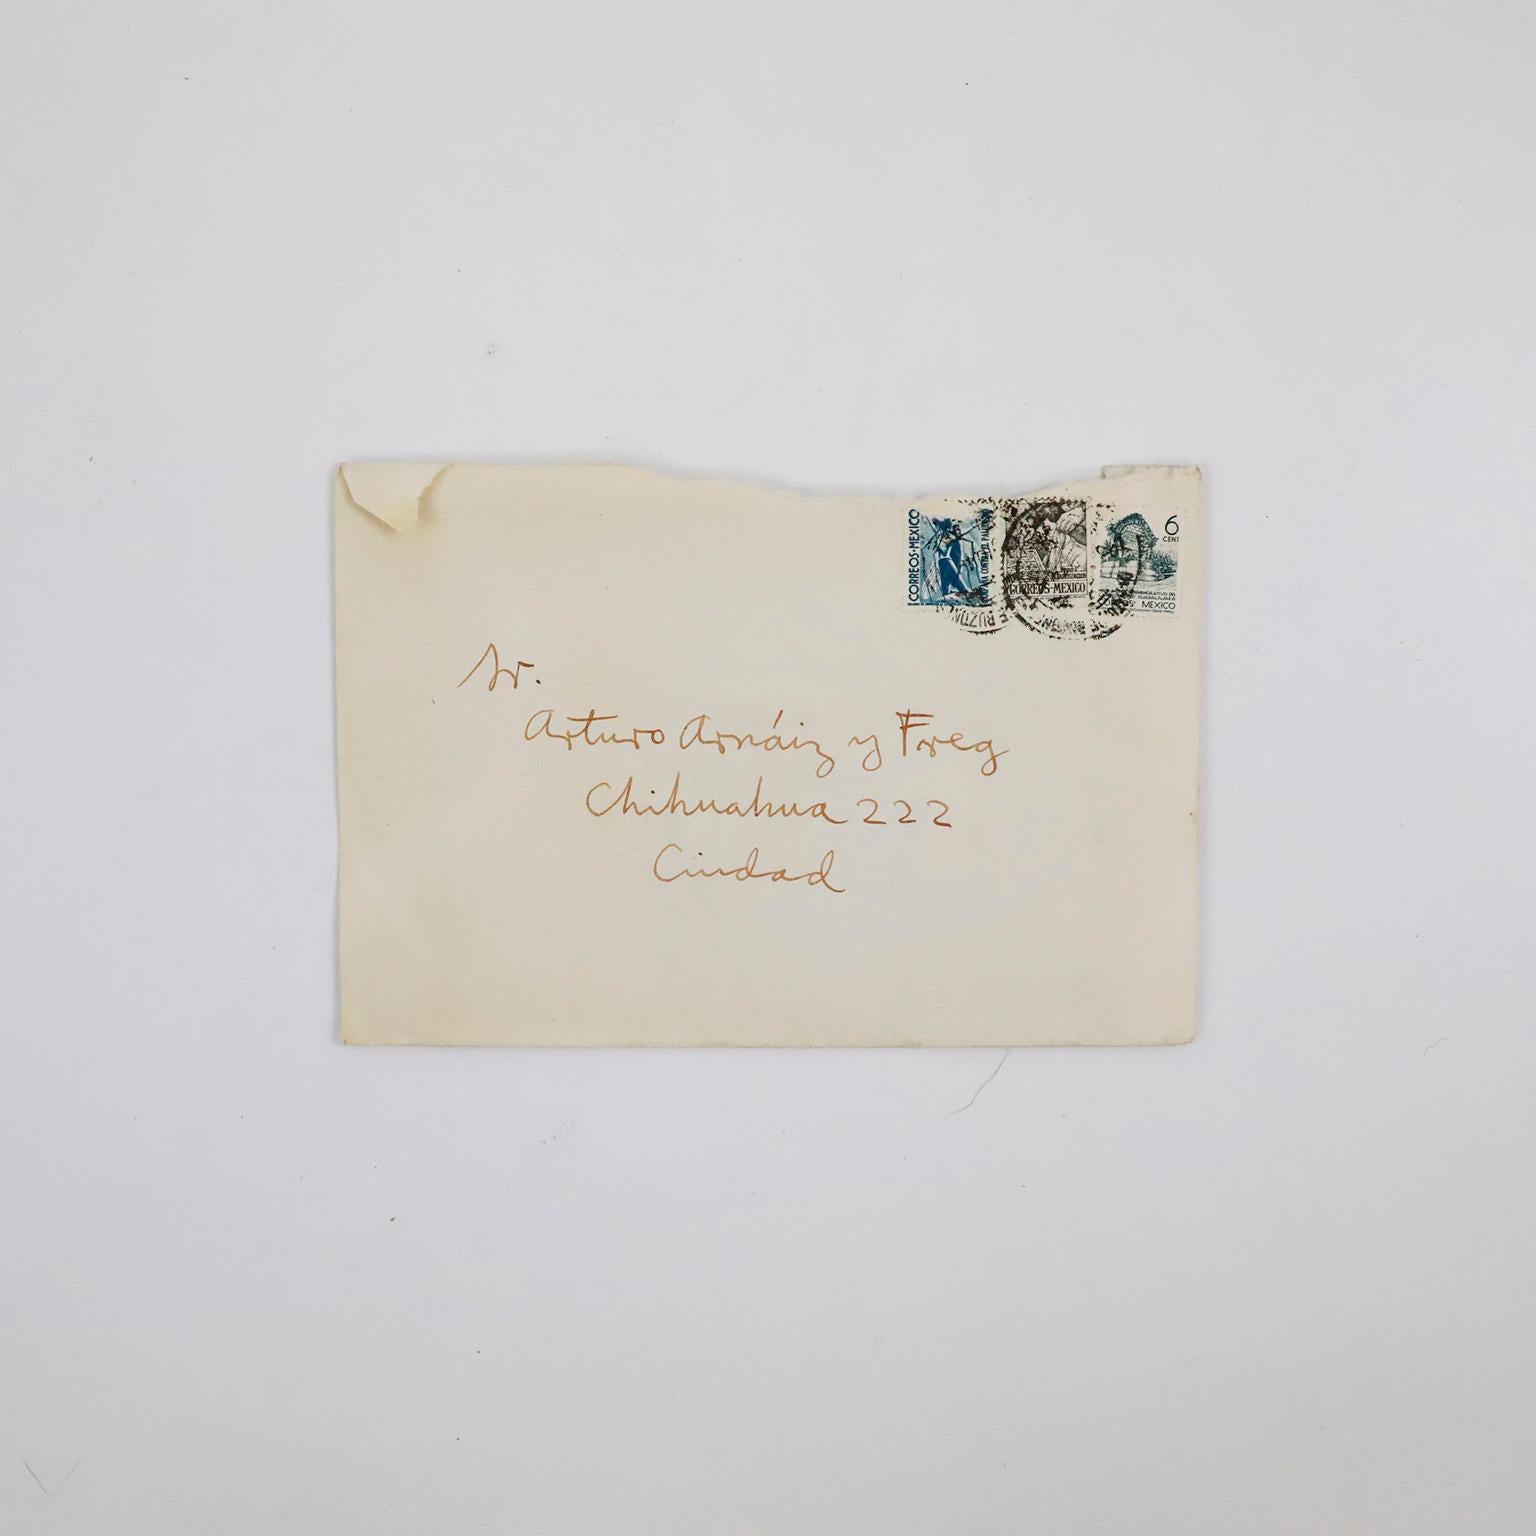 Antique Postcard Signed by Raul Anguiano. Dedicated to Arturo Arnaiz y Freg 1951.

José Raúl Anguiano Valadez (February 26, 1915 – January 13, 2006) was a notable Mexican painter of the 20th century, part of the “second generation” of Mexican